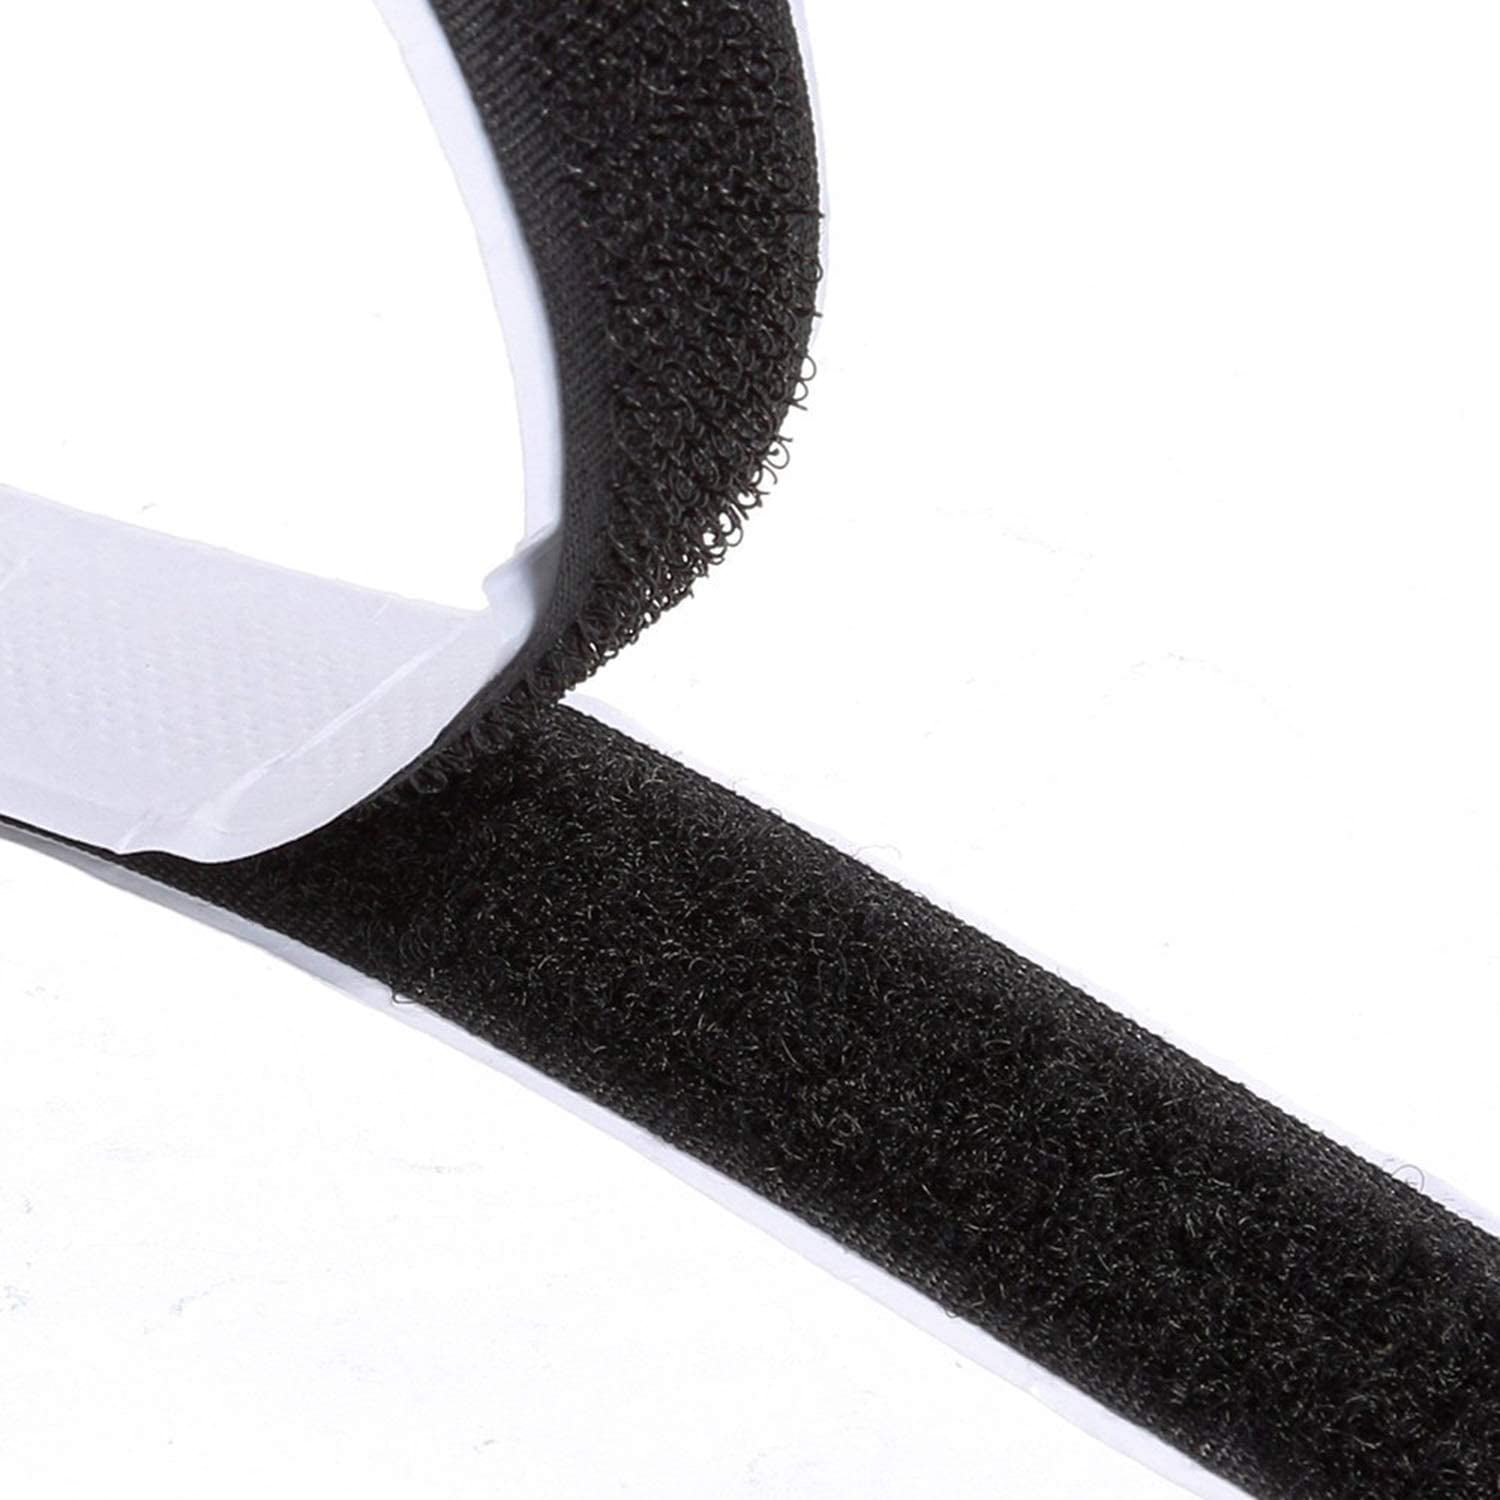 8m Sided Tape Extra Self Adhesive Velcro Tape 20mm Wide Black Sewing School Office Home - Walmart.com